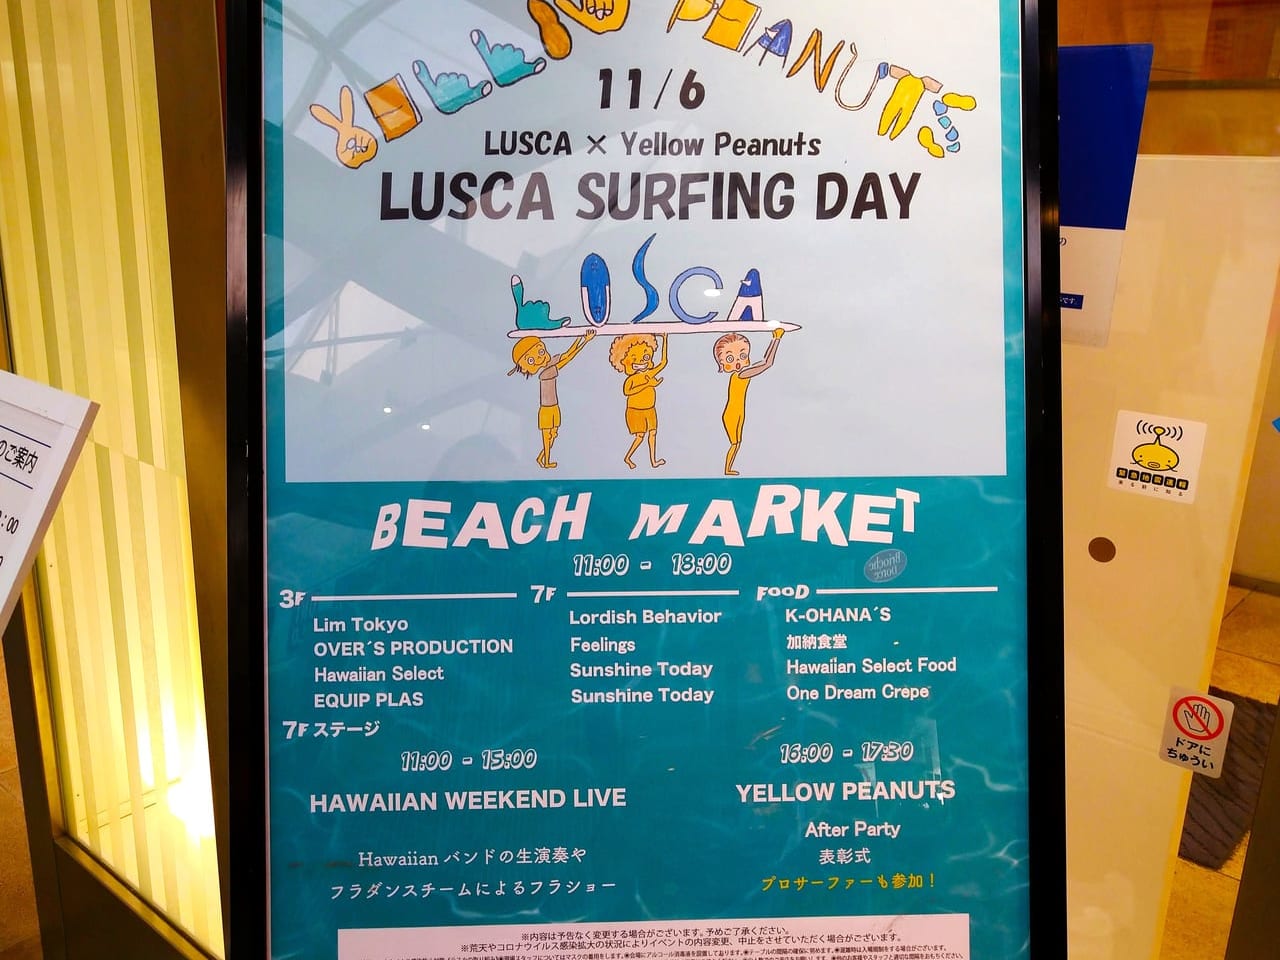 LUSCA SURFING DAY